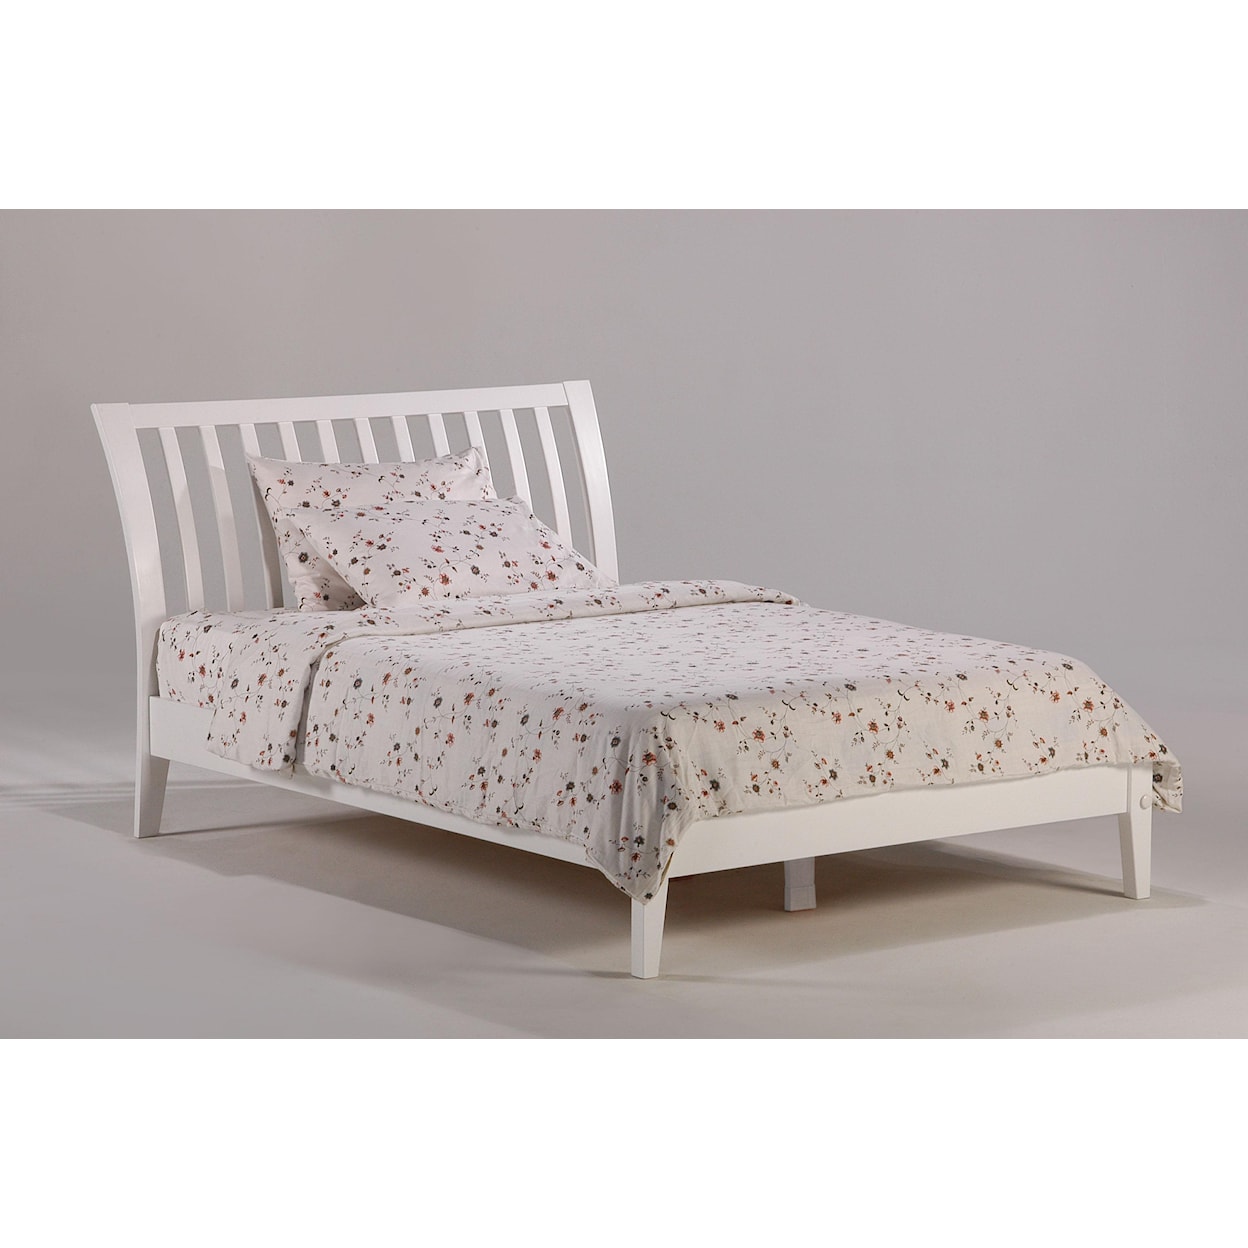 Night & Day Furniture Spice Twin Bed